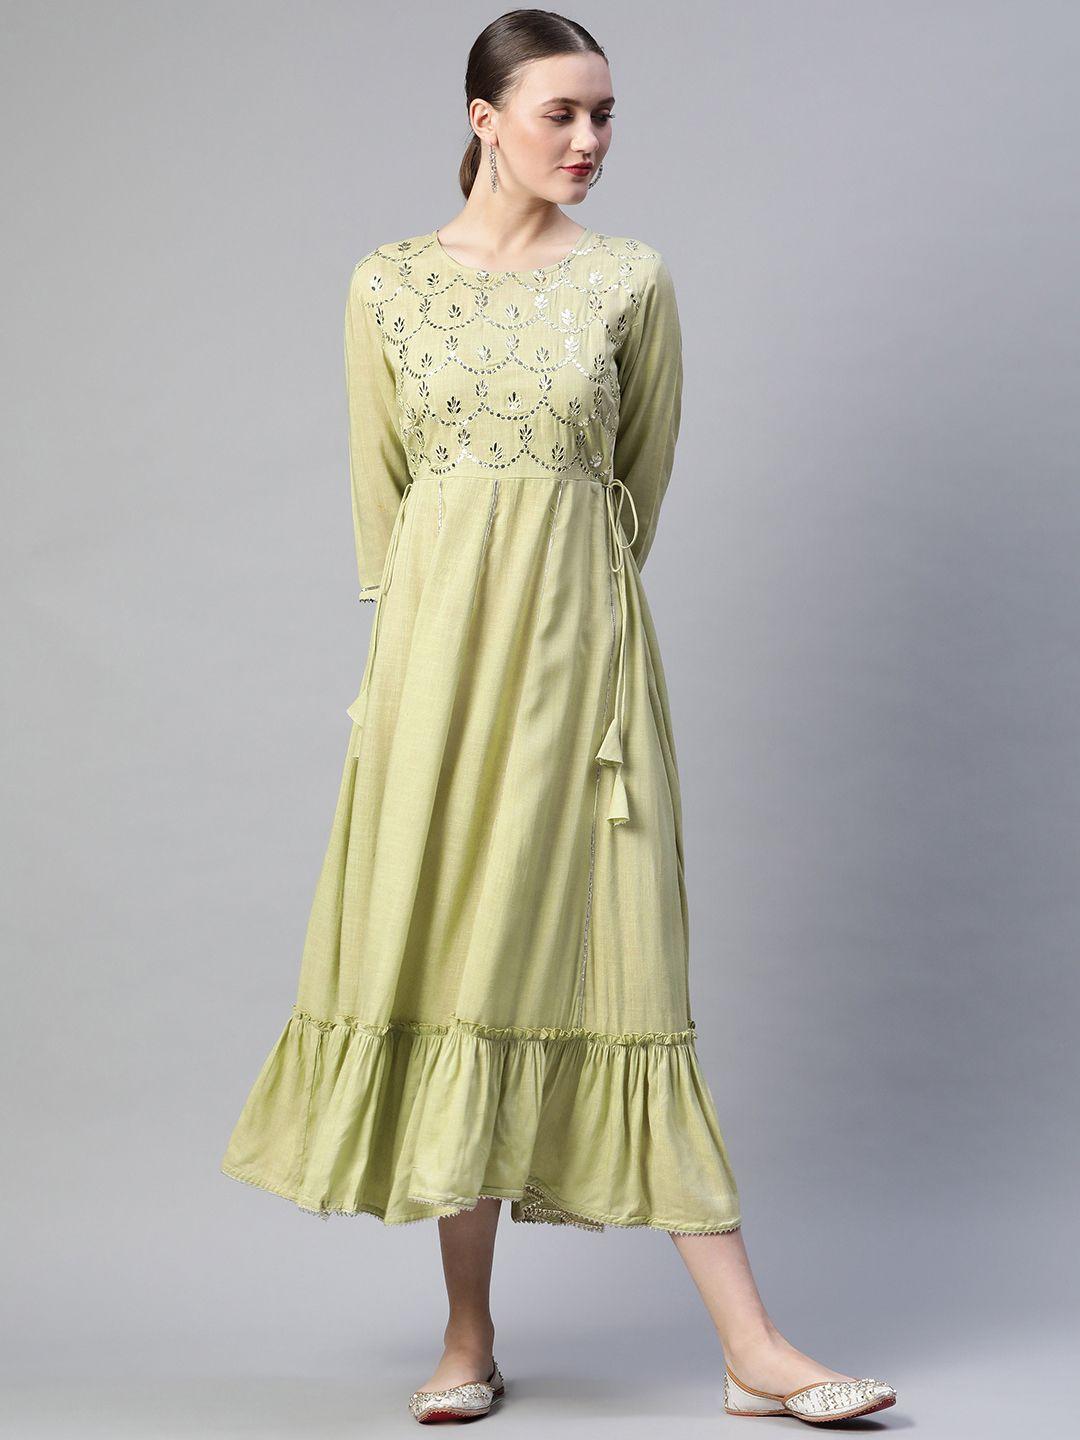 readiprint fashions lime green & silver floral yoke embroidered midi fit & flare dress